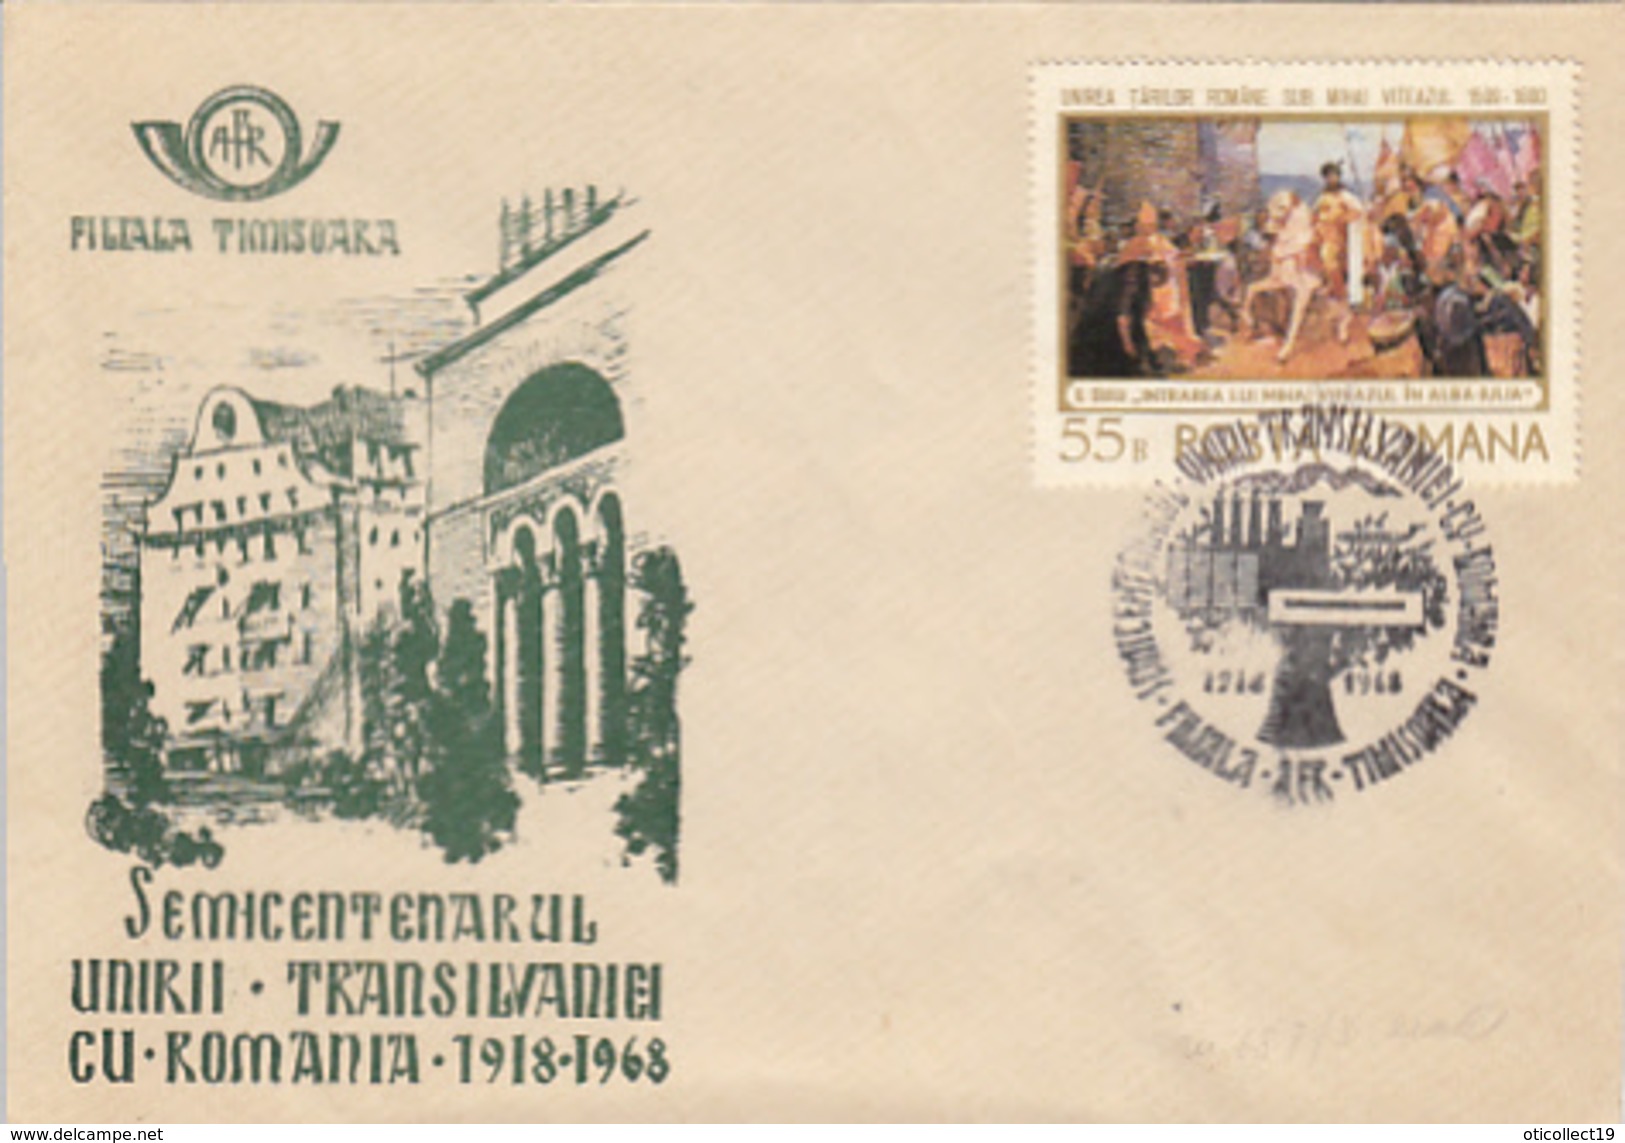 ROMANIAN GREAT UNION ANNIVERSARY, SPECIAL COVER, 1968, ROMANIA - Covers & Documents